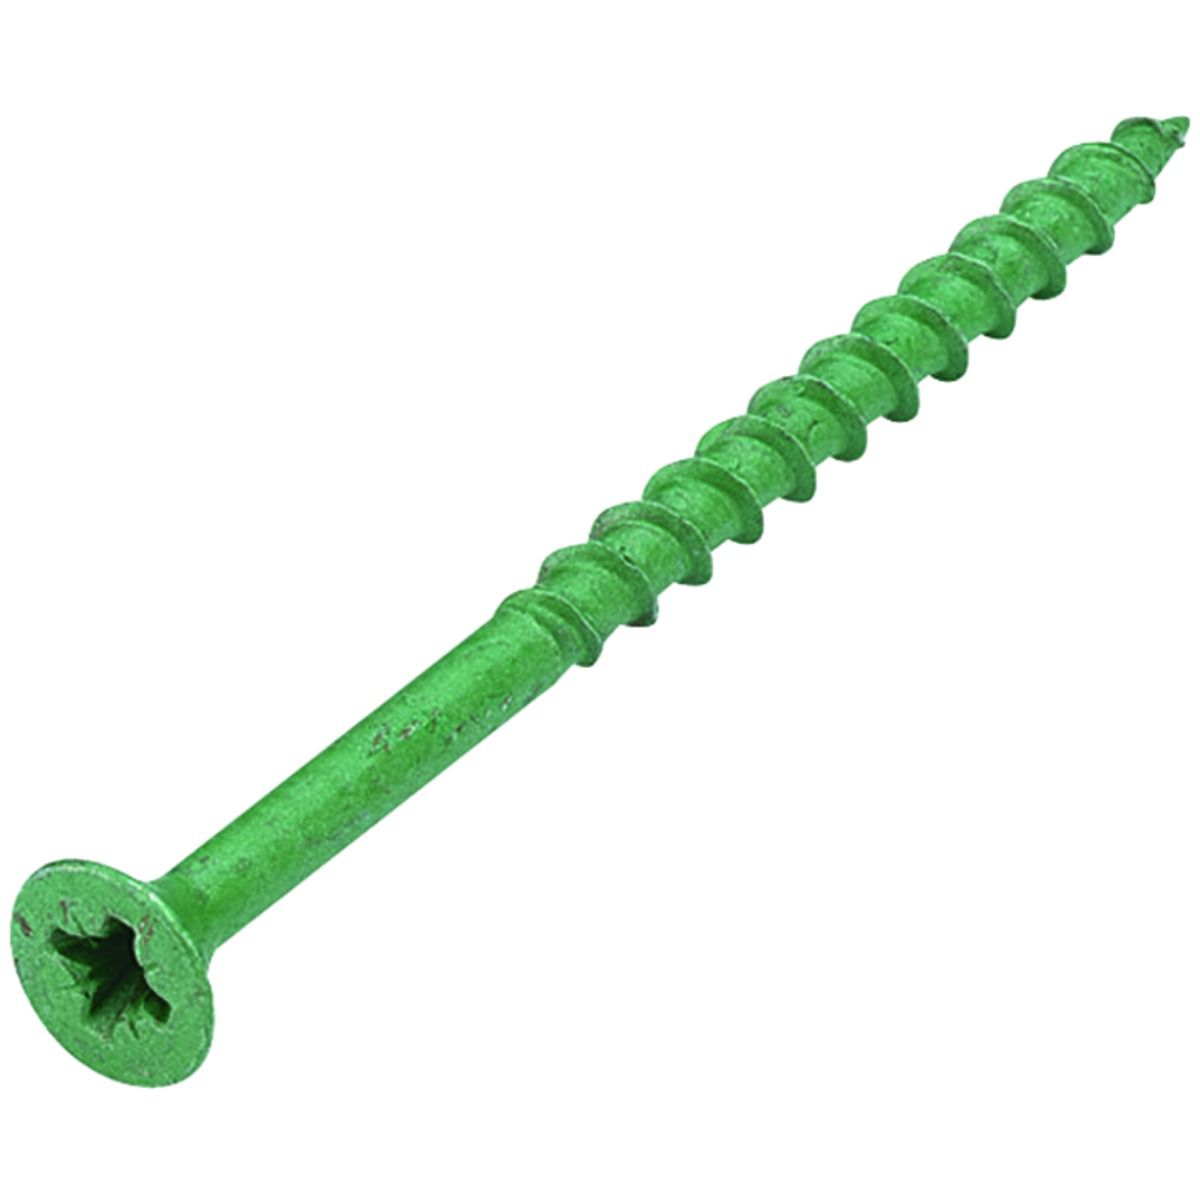 Image of Wickes External Grade Screws - Green No 8 x 63mm Pack of 20